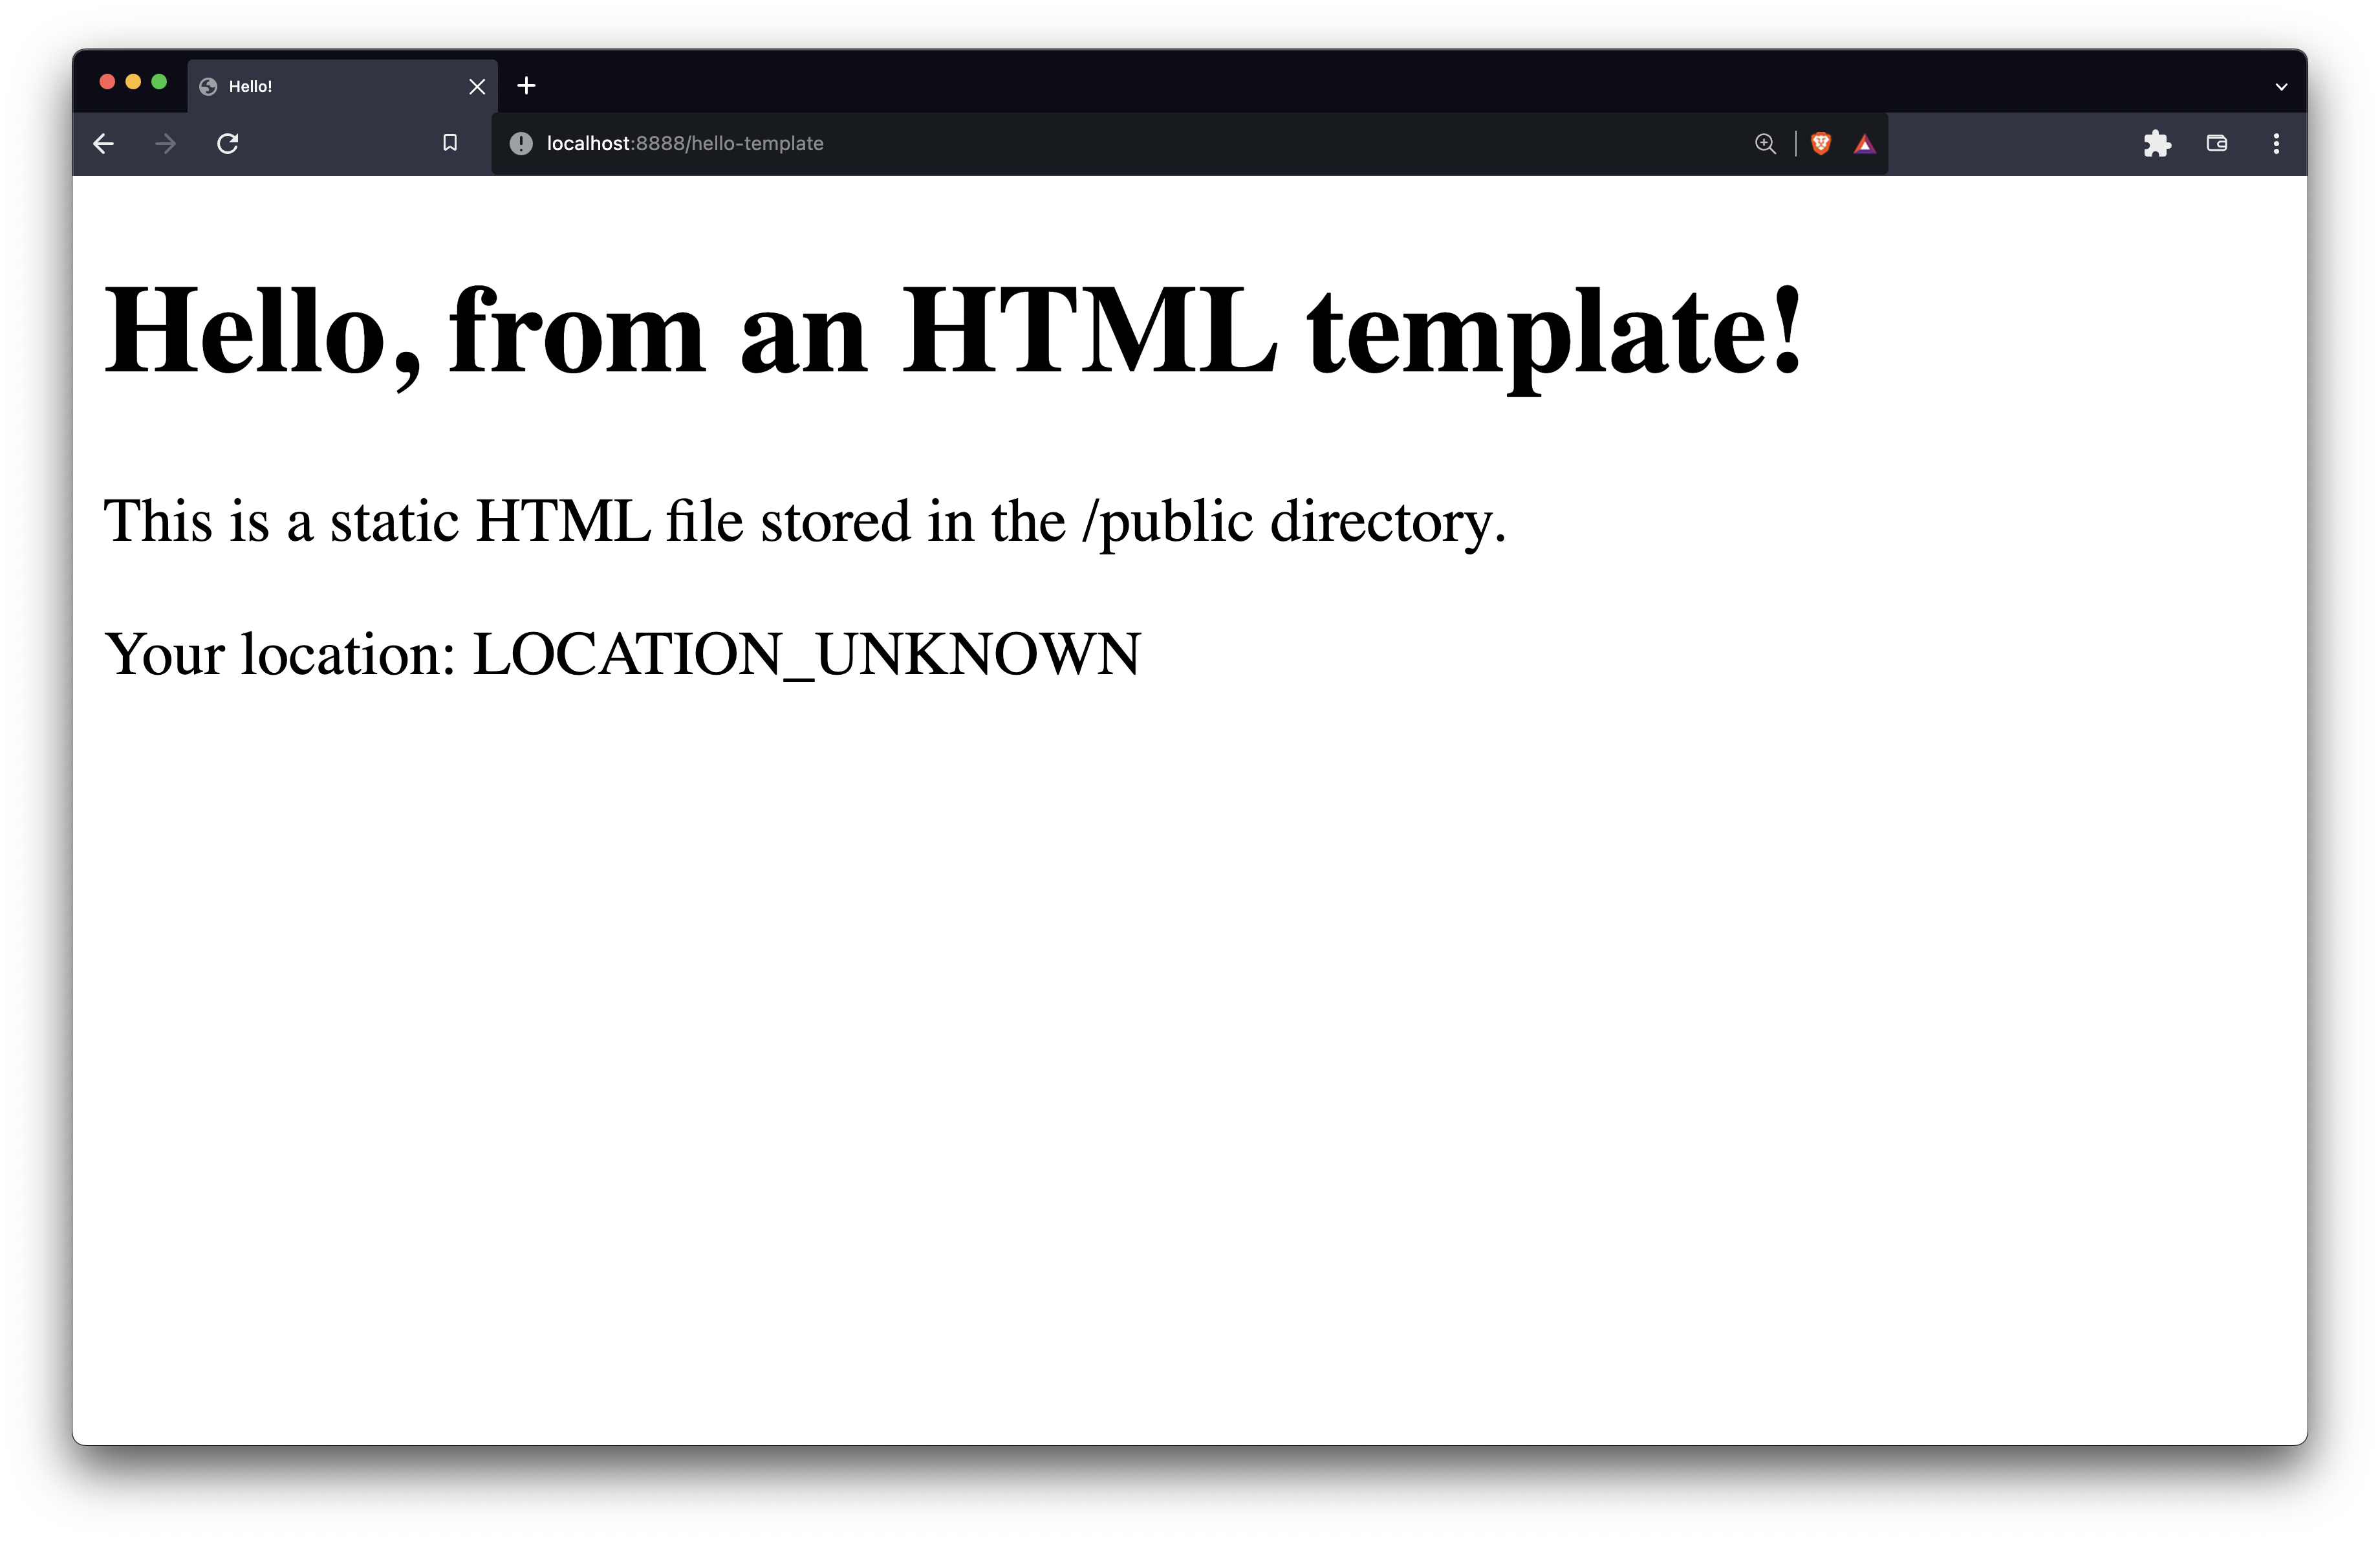 A browser screenshot, showing the hello template file with the placeholder location unknown